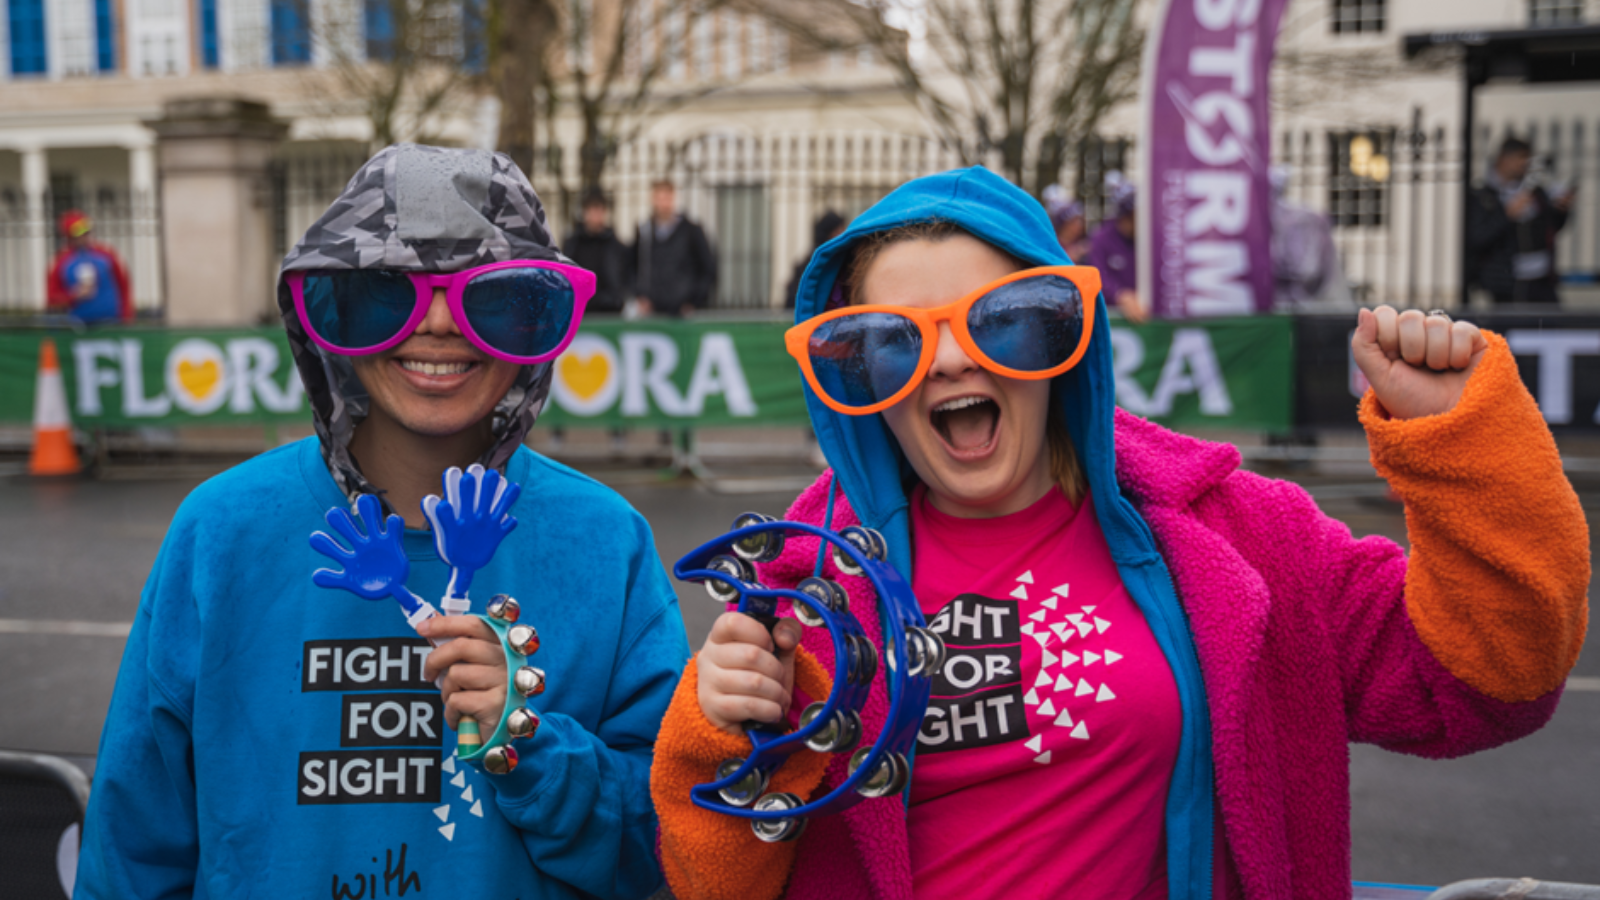 Two people in Fight for Sight jumpers wearing massive sunglasses and smiling.